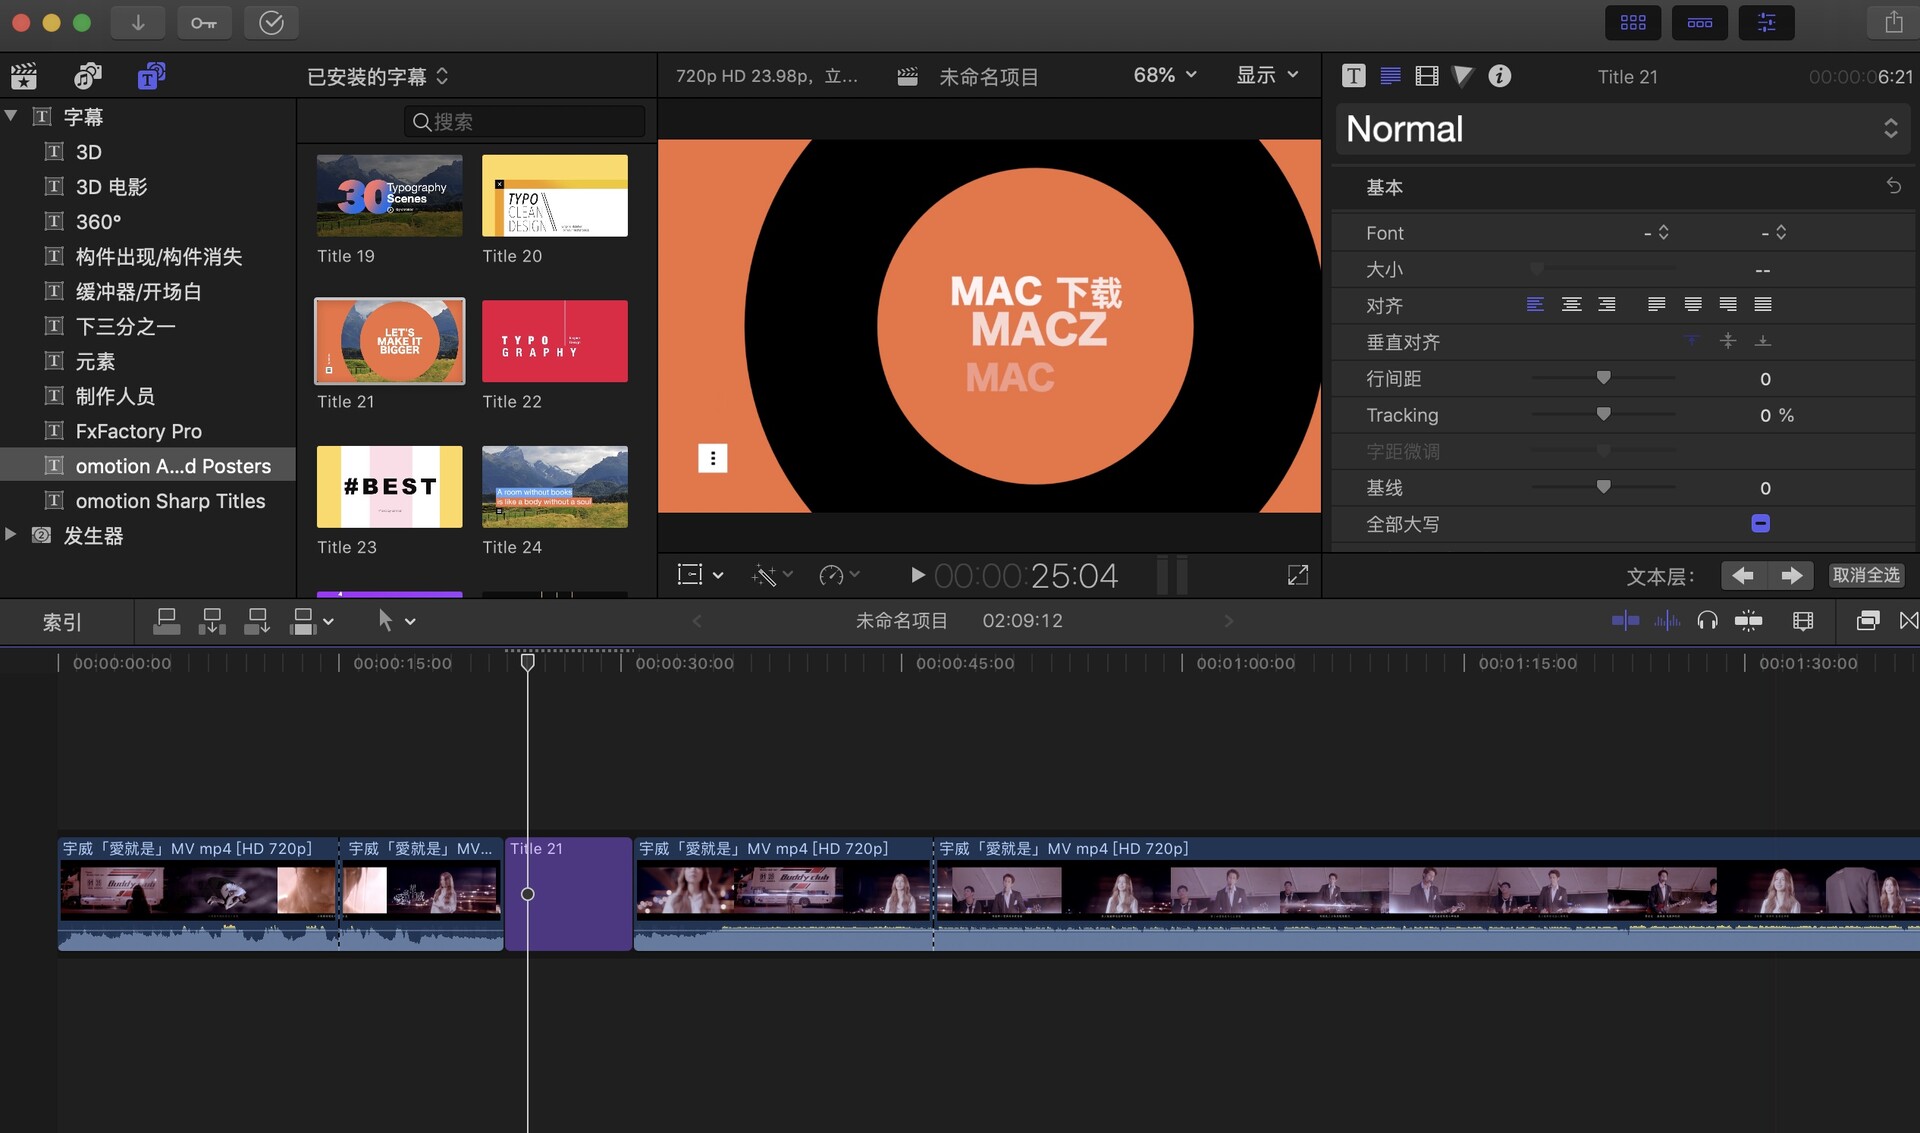 fcpx插件：Animated Posters for mac(30款动画海报标题效果)